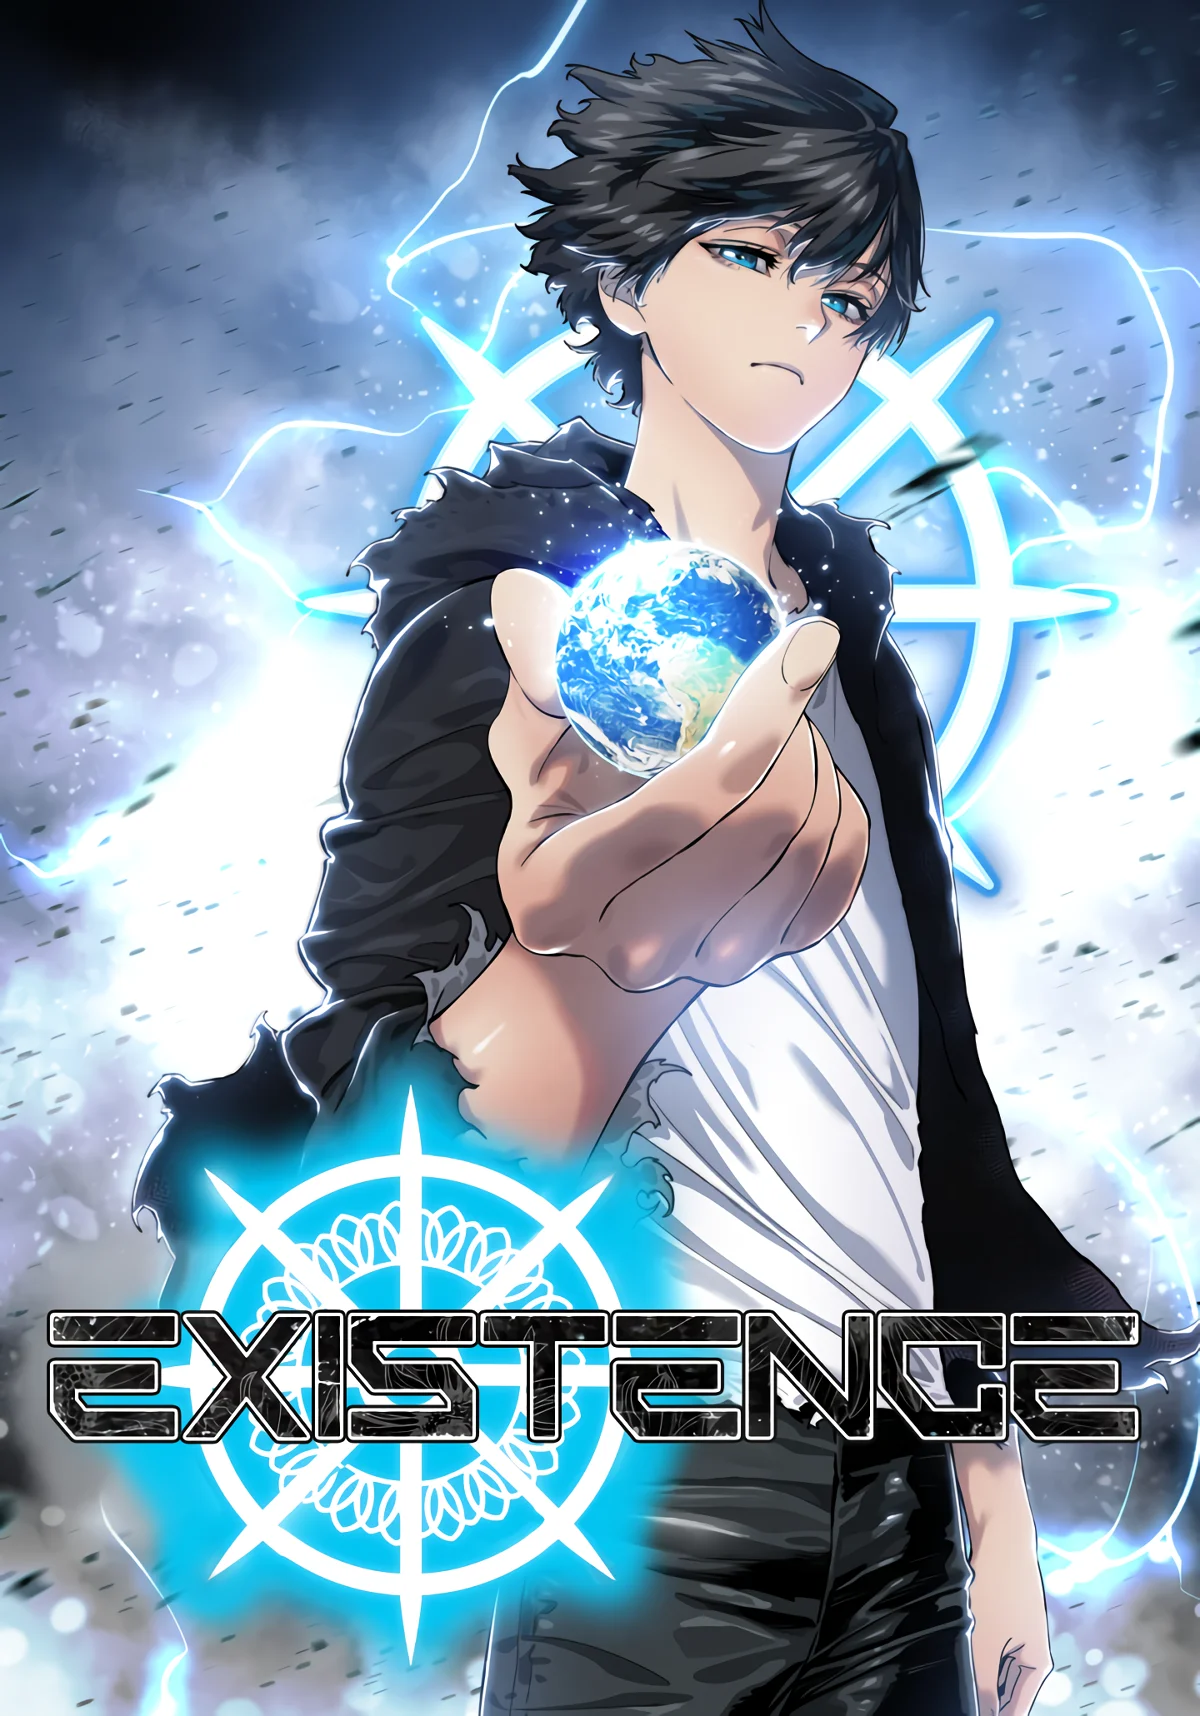 Existnce